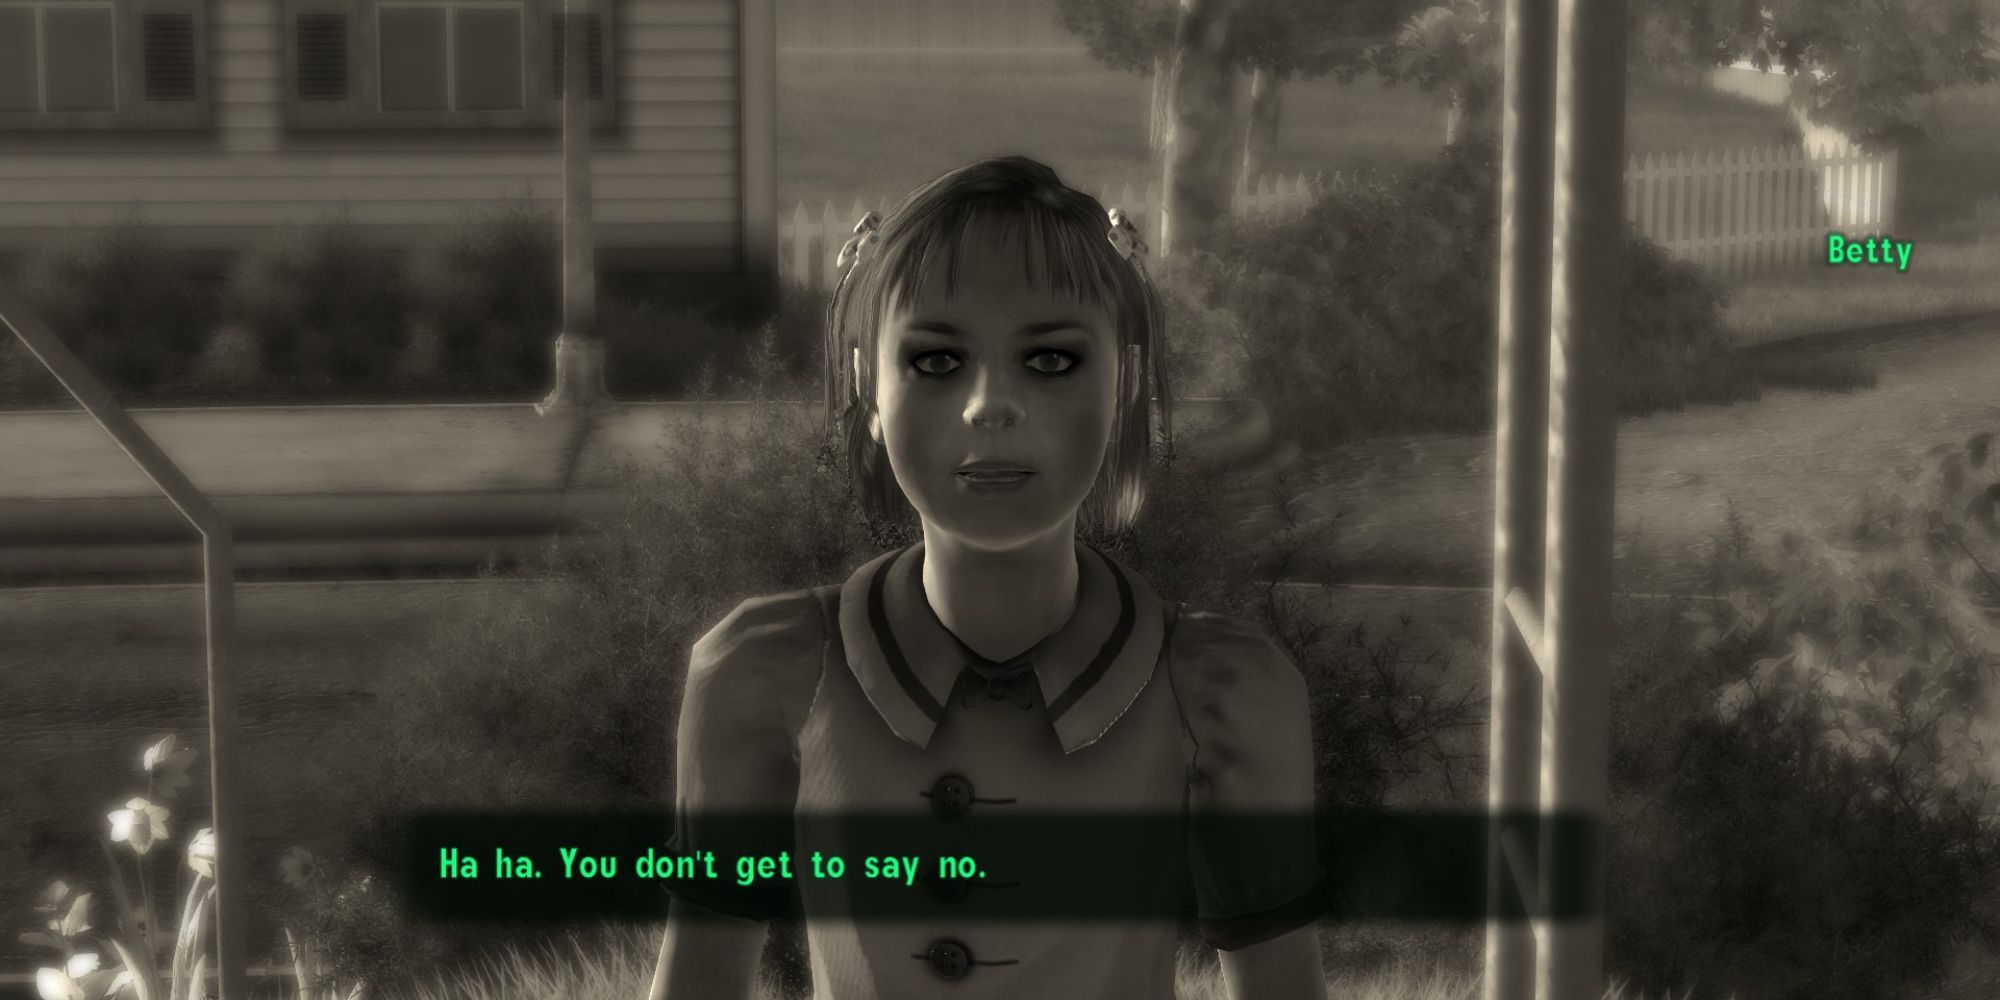 Betty tells players that they cannot refuse her game in Tranquility Lane